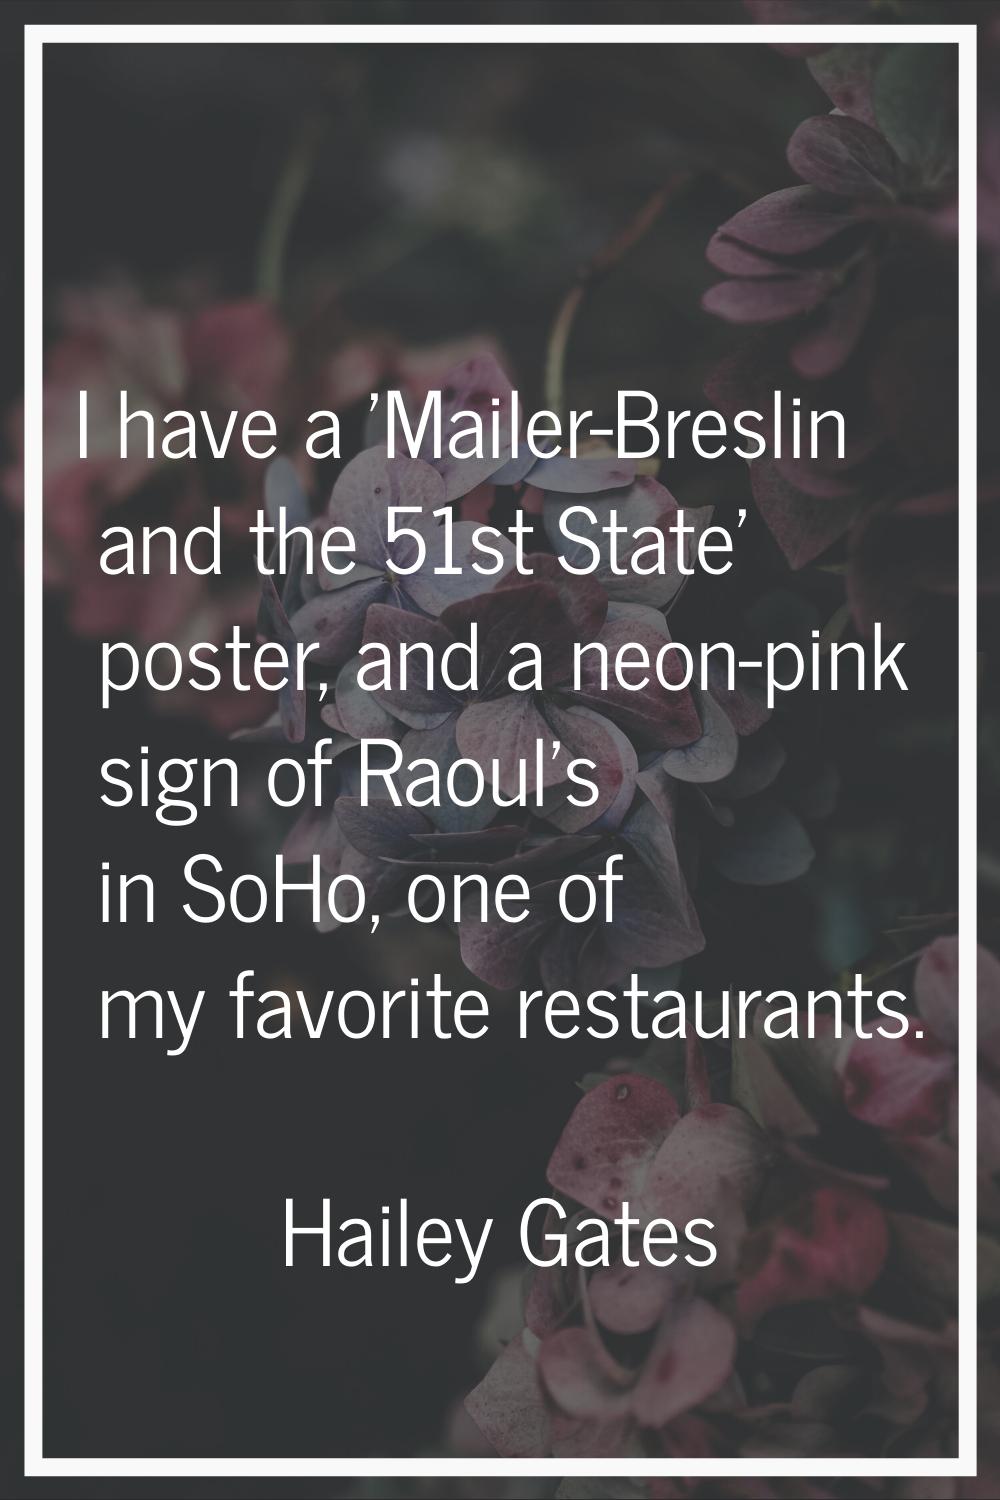 I have a 'Mailer-Breslin and the 51st State' poster, and a neon-pink sign of Raoul's in SoHo, one o